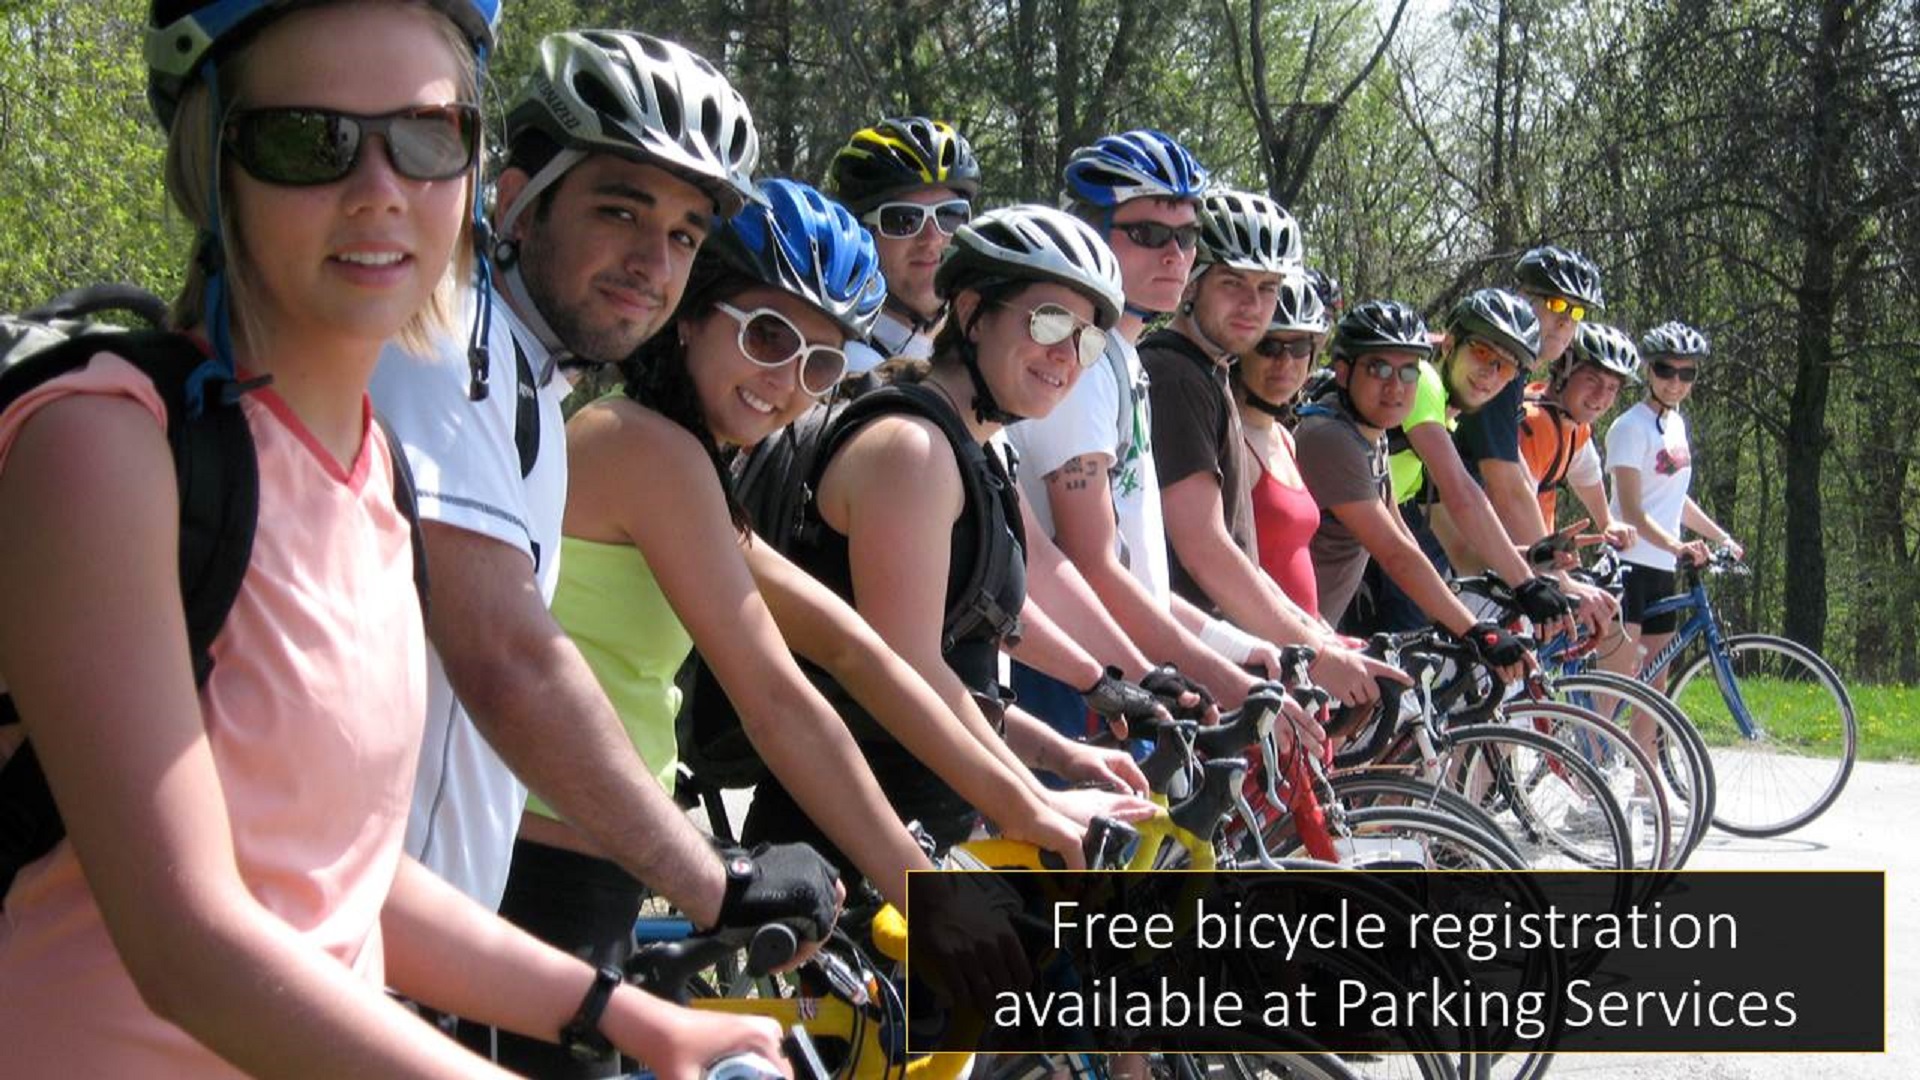 Free bicycle registration at Parking Services